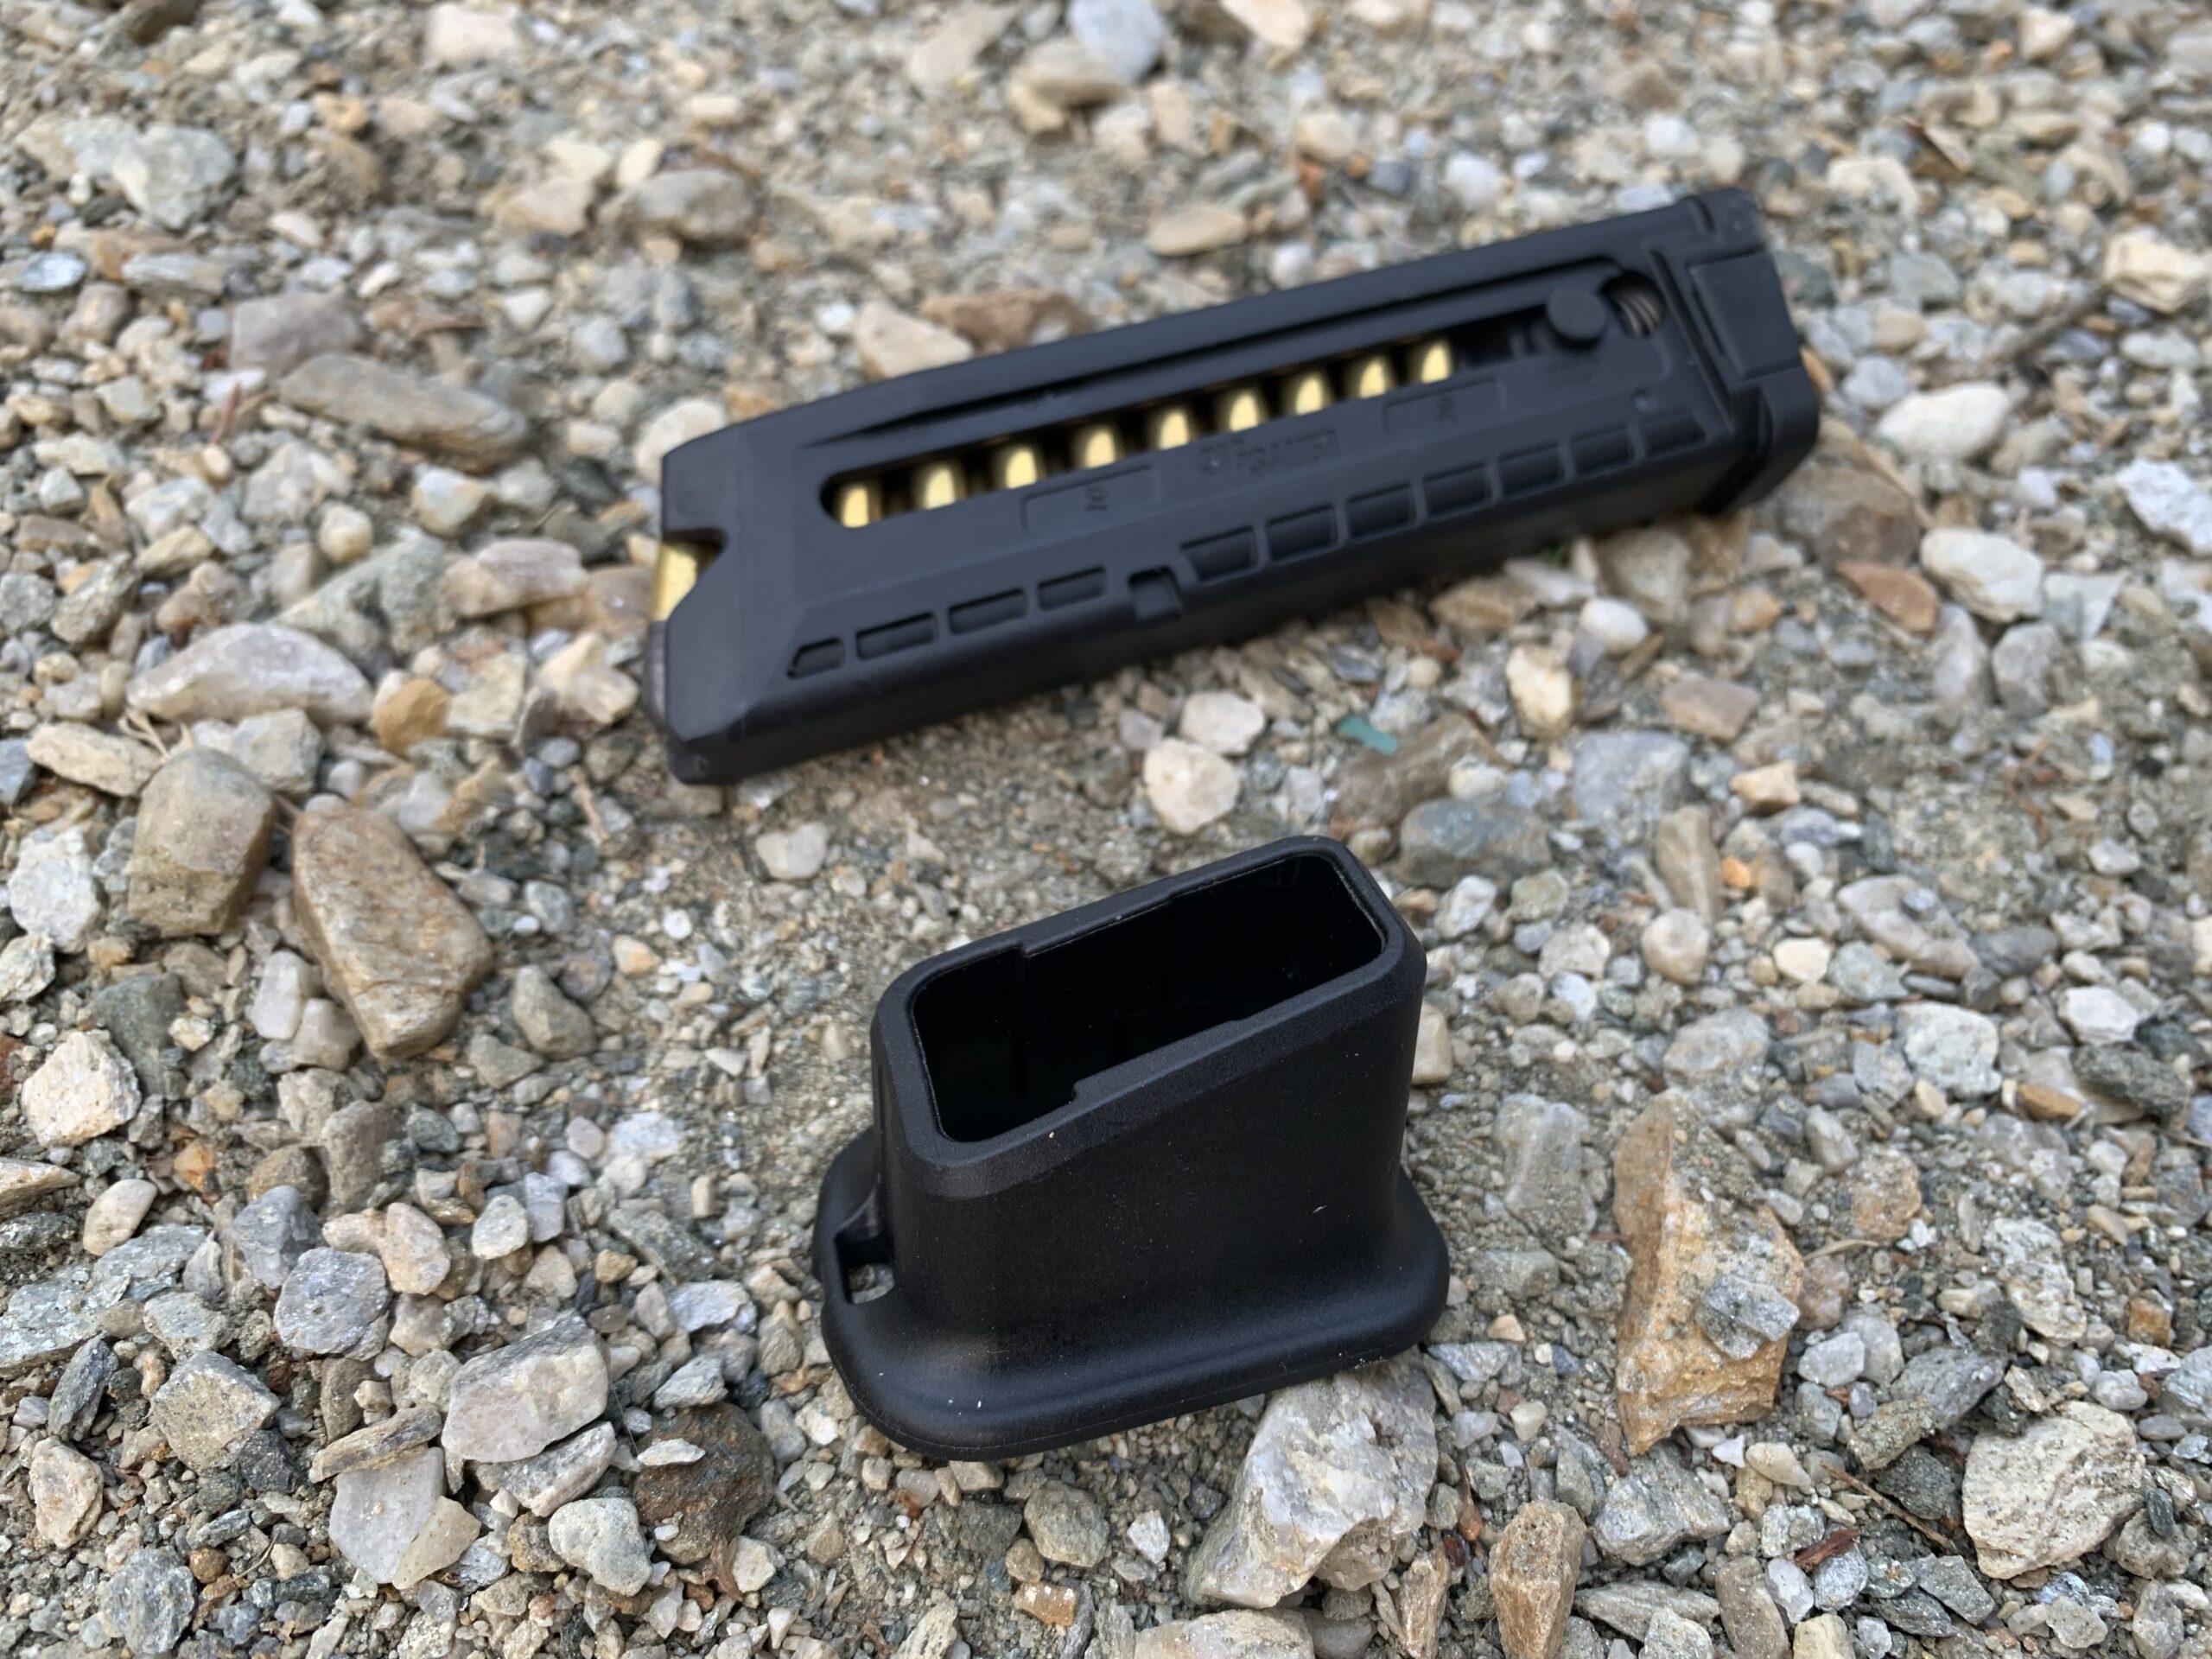 The Sig P322 mag loader and 20-round magazine